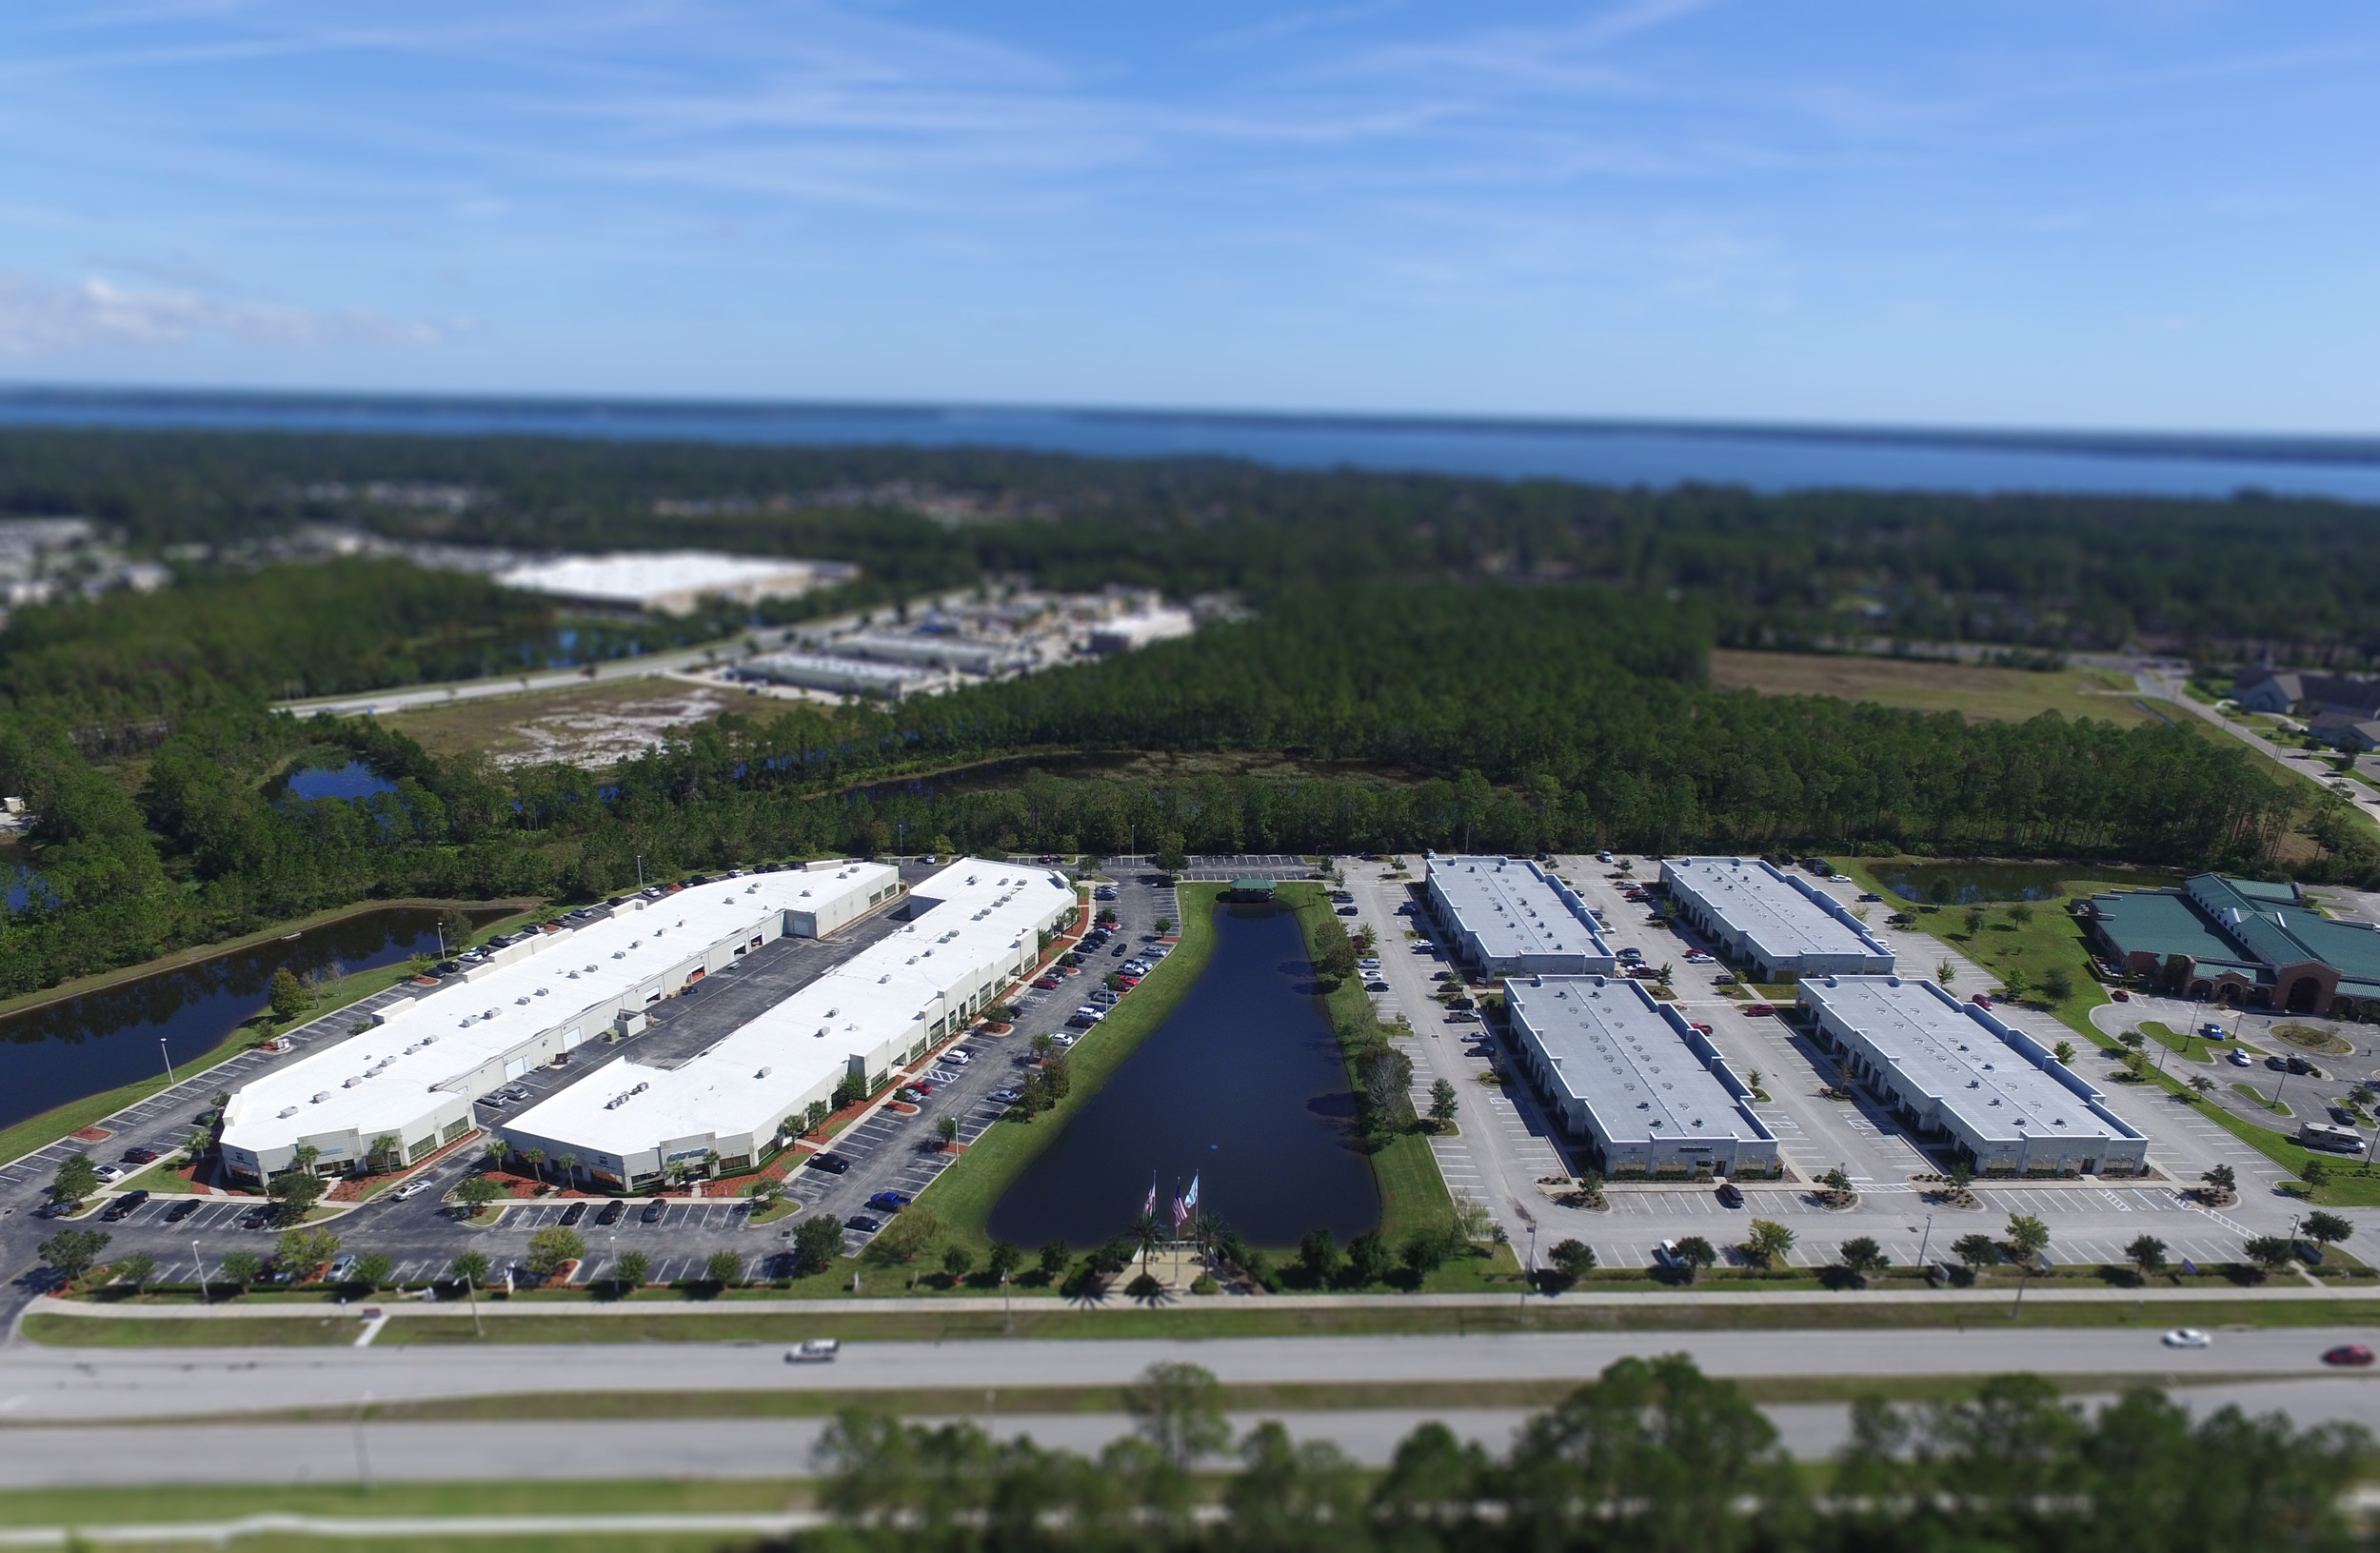 Located 20 miles southwest of downtown Jacksonville, Fleming Island Business Park consists of 143,669 square feet within six single story office buildings.